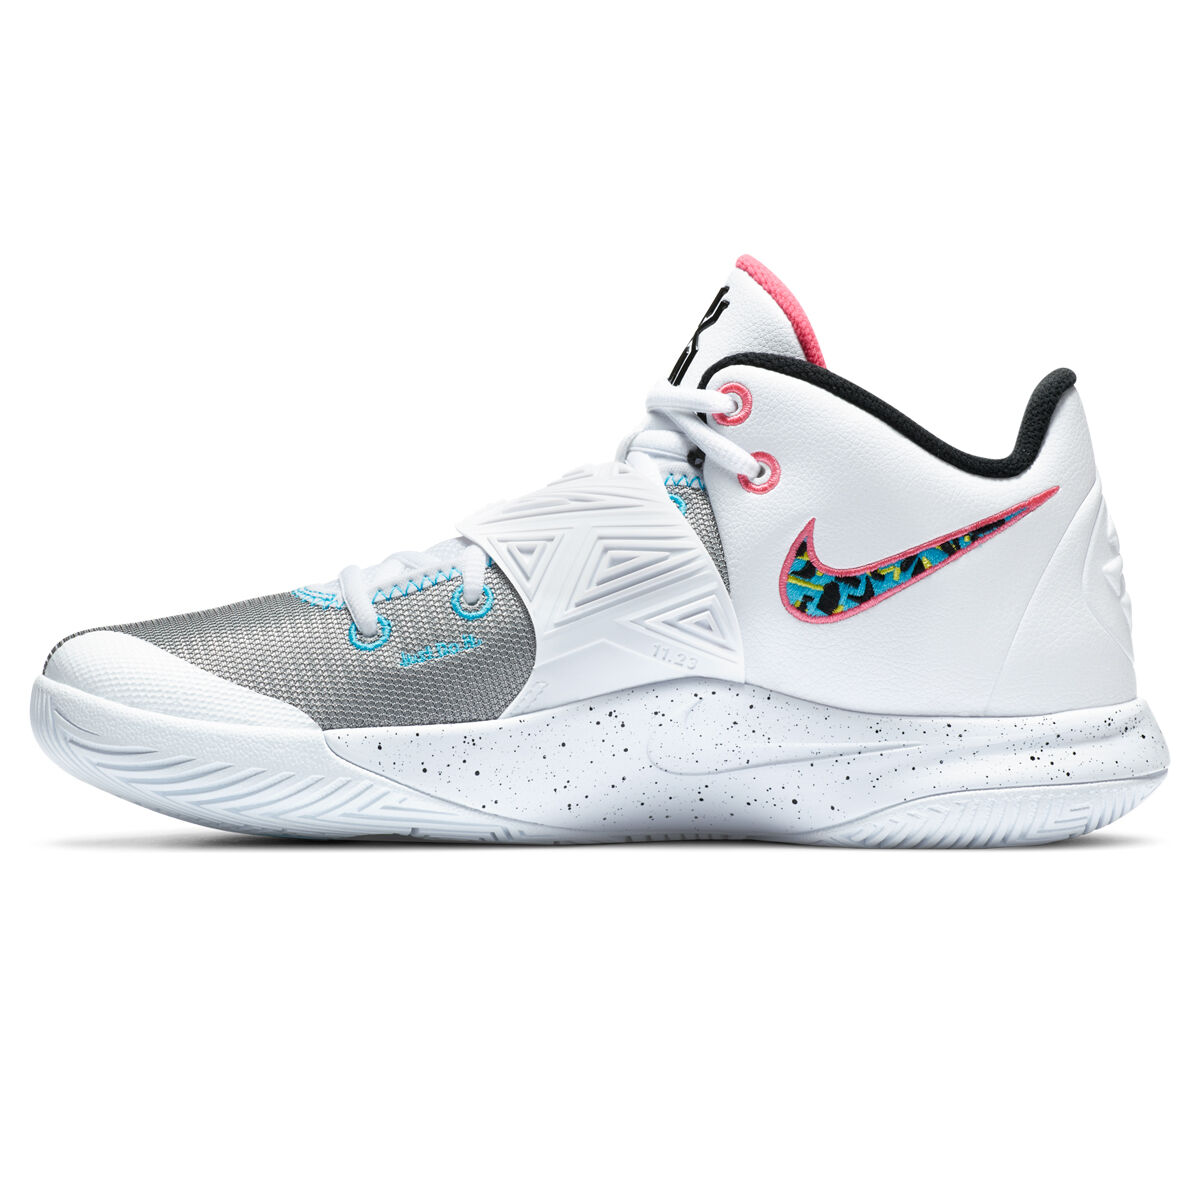 kyrie flytrap basketball shoes white